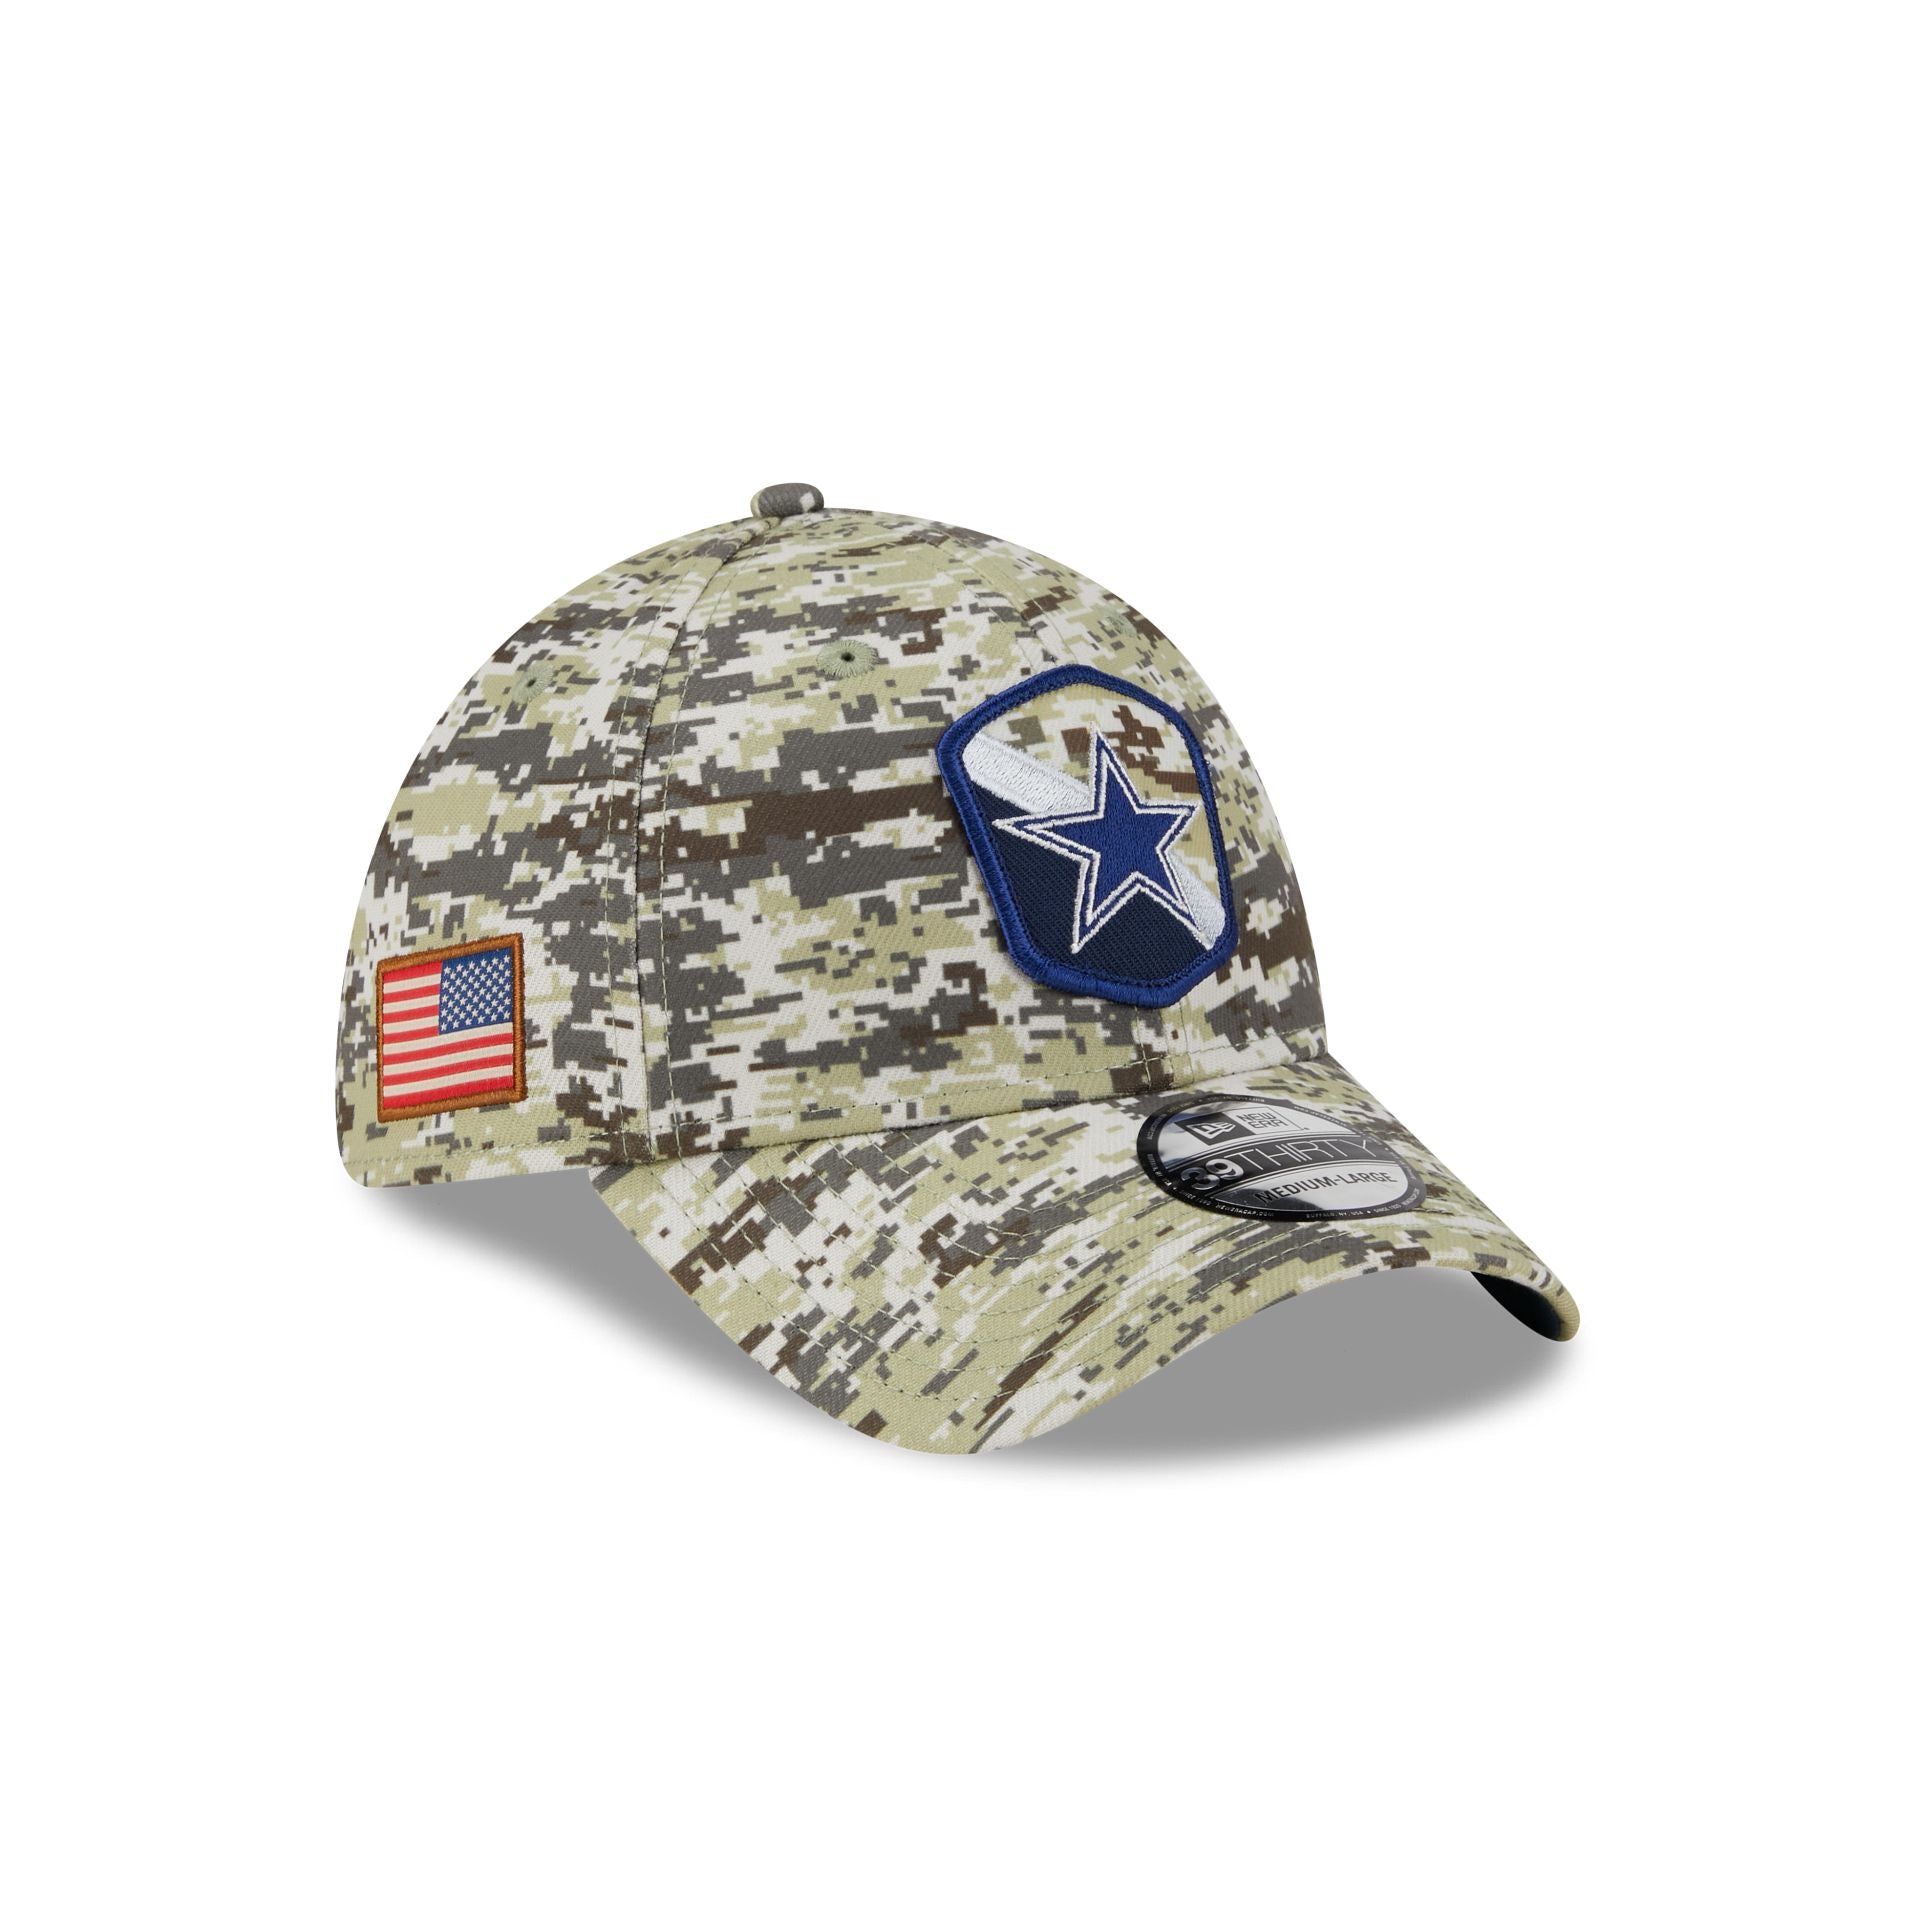 St Louis Rams NFL TEAM-BASIC Army Camo Fitted Hat by New Era